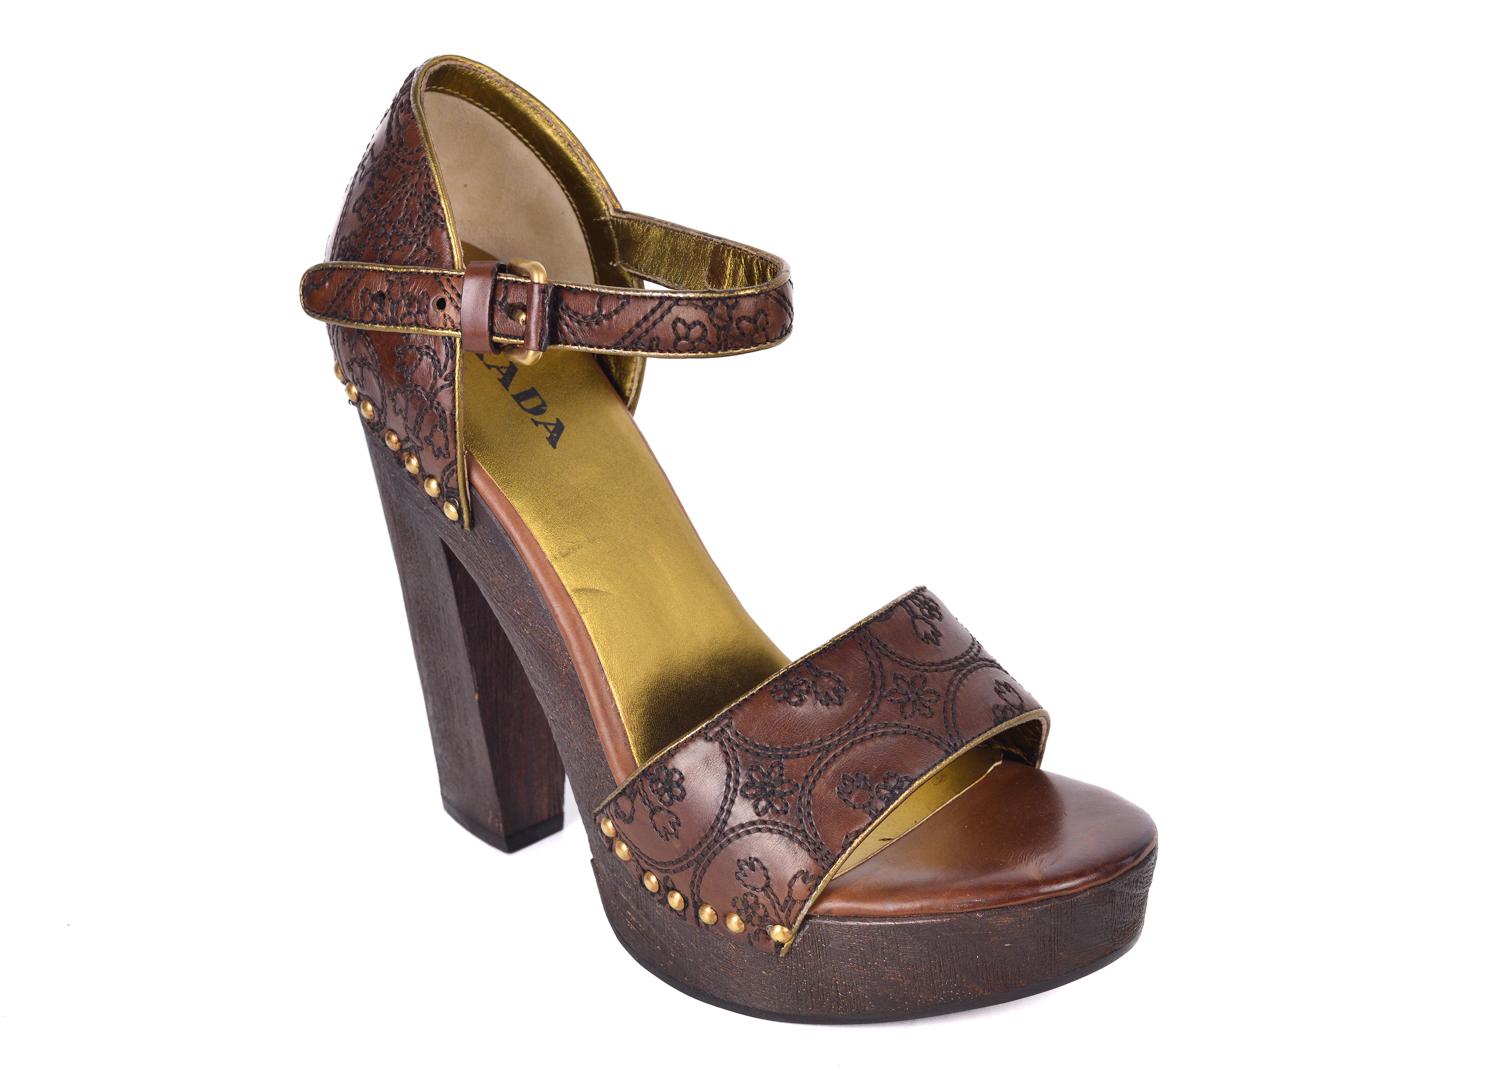 Rich brown leather pumps with a retro-chic aesthetic from Prada, courtesy of a skyscraper wooden block heel and platform.  Leather upper. Goldtone Rivets. Adjustable ankle strap. Leather lining. Rubber sole. Padded insole. platforms and buckle